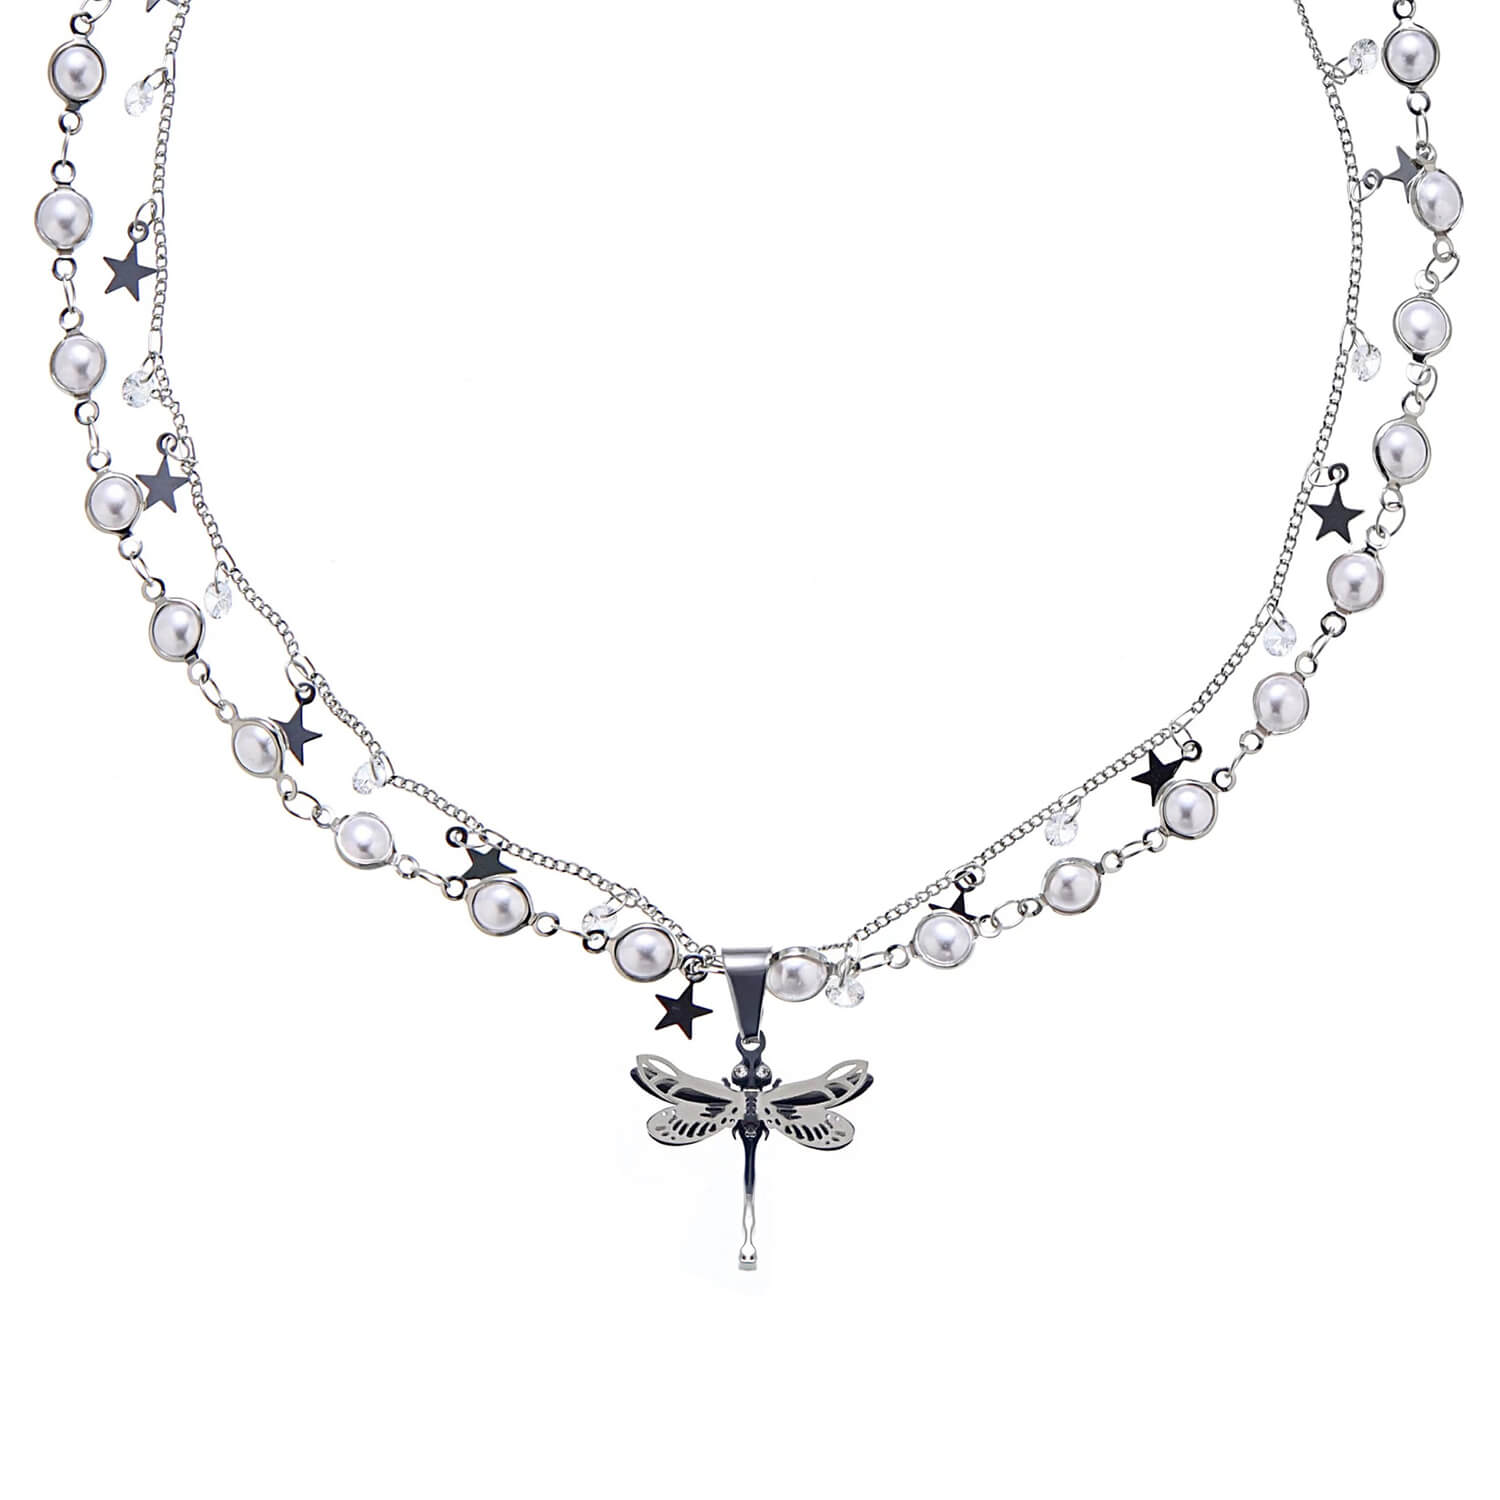 Dragonfly Delight Natural Pearl Necklace  Buy at Khanie